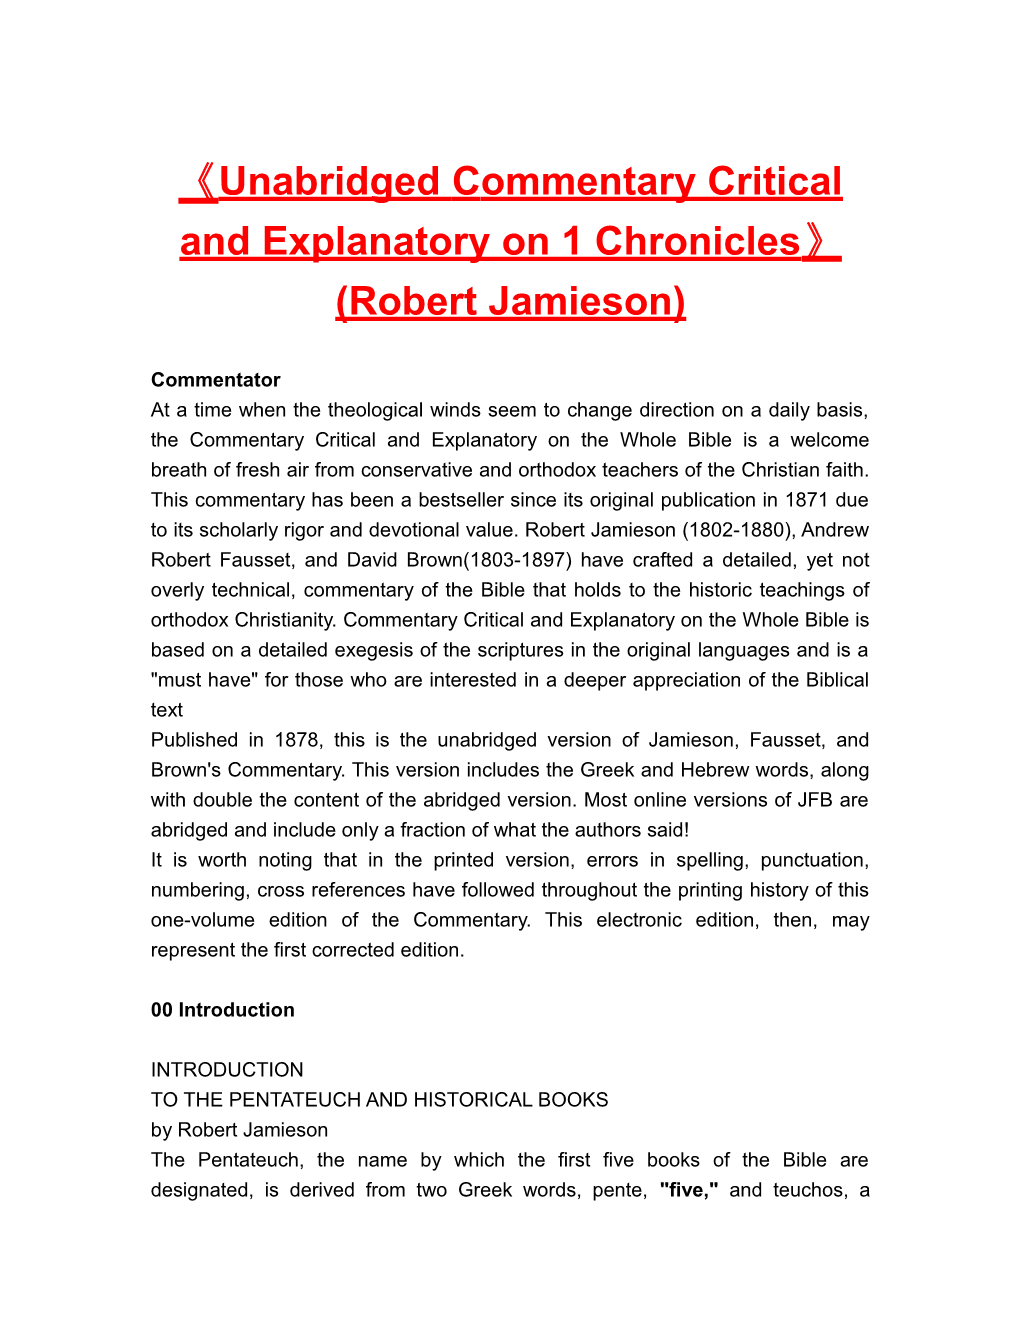 Unabridged Commentary Critical and Explanatory on 1 Chronicles (Robert Jamieson)